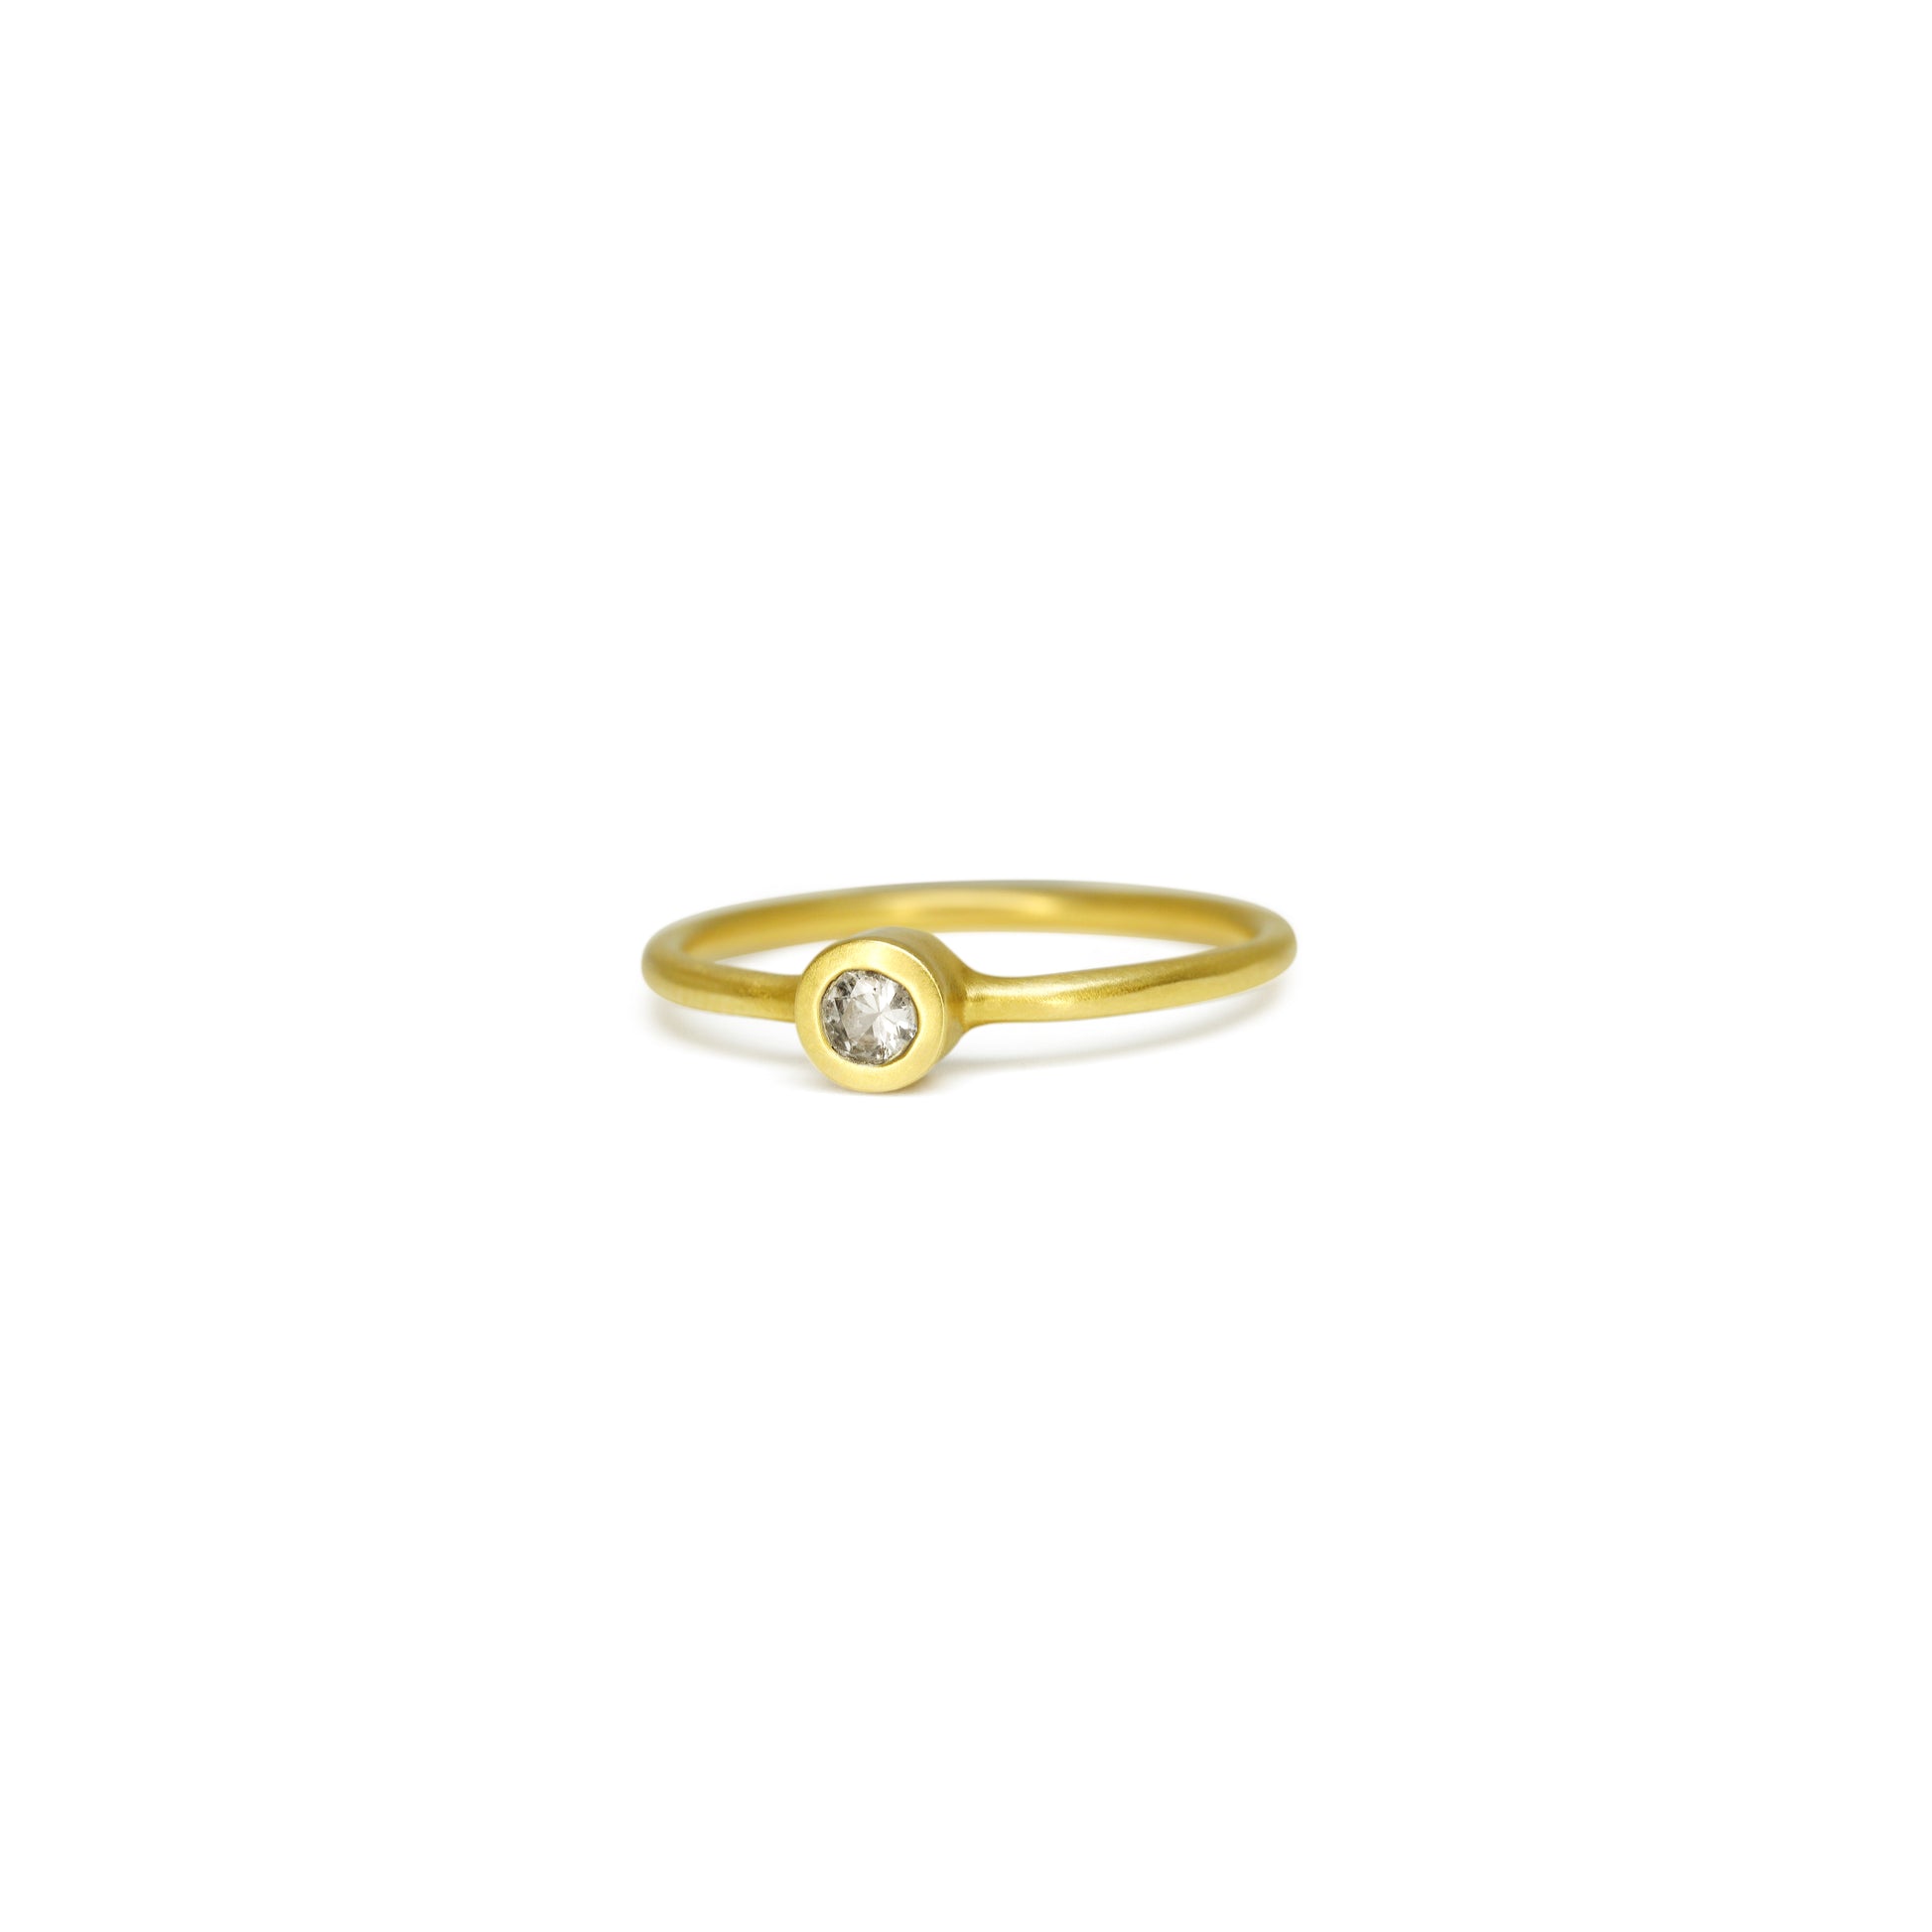 Details  Indulge in the timeless elegance of our Single Diamond Ring. This sparkling centerpiece features exquisite craftsmanship that will captivate your heart and dazzle on your finger. Elevate your style and make a statement with this stunning piece of jewelry.  3mm Round White Diamond Round Band 14k Yellow Gold Satin Finish WxT: 1.45mm